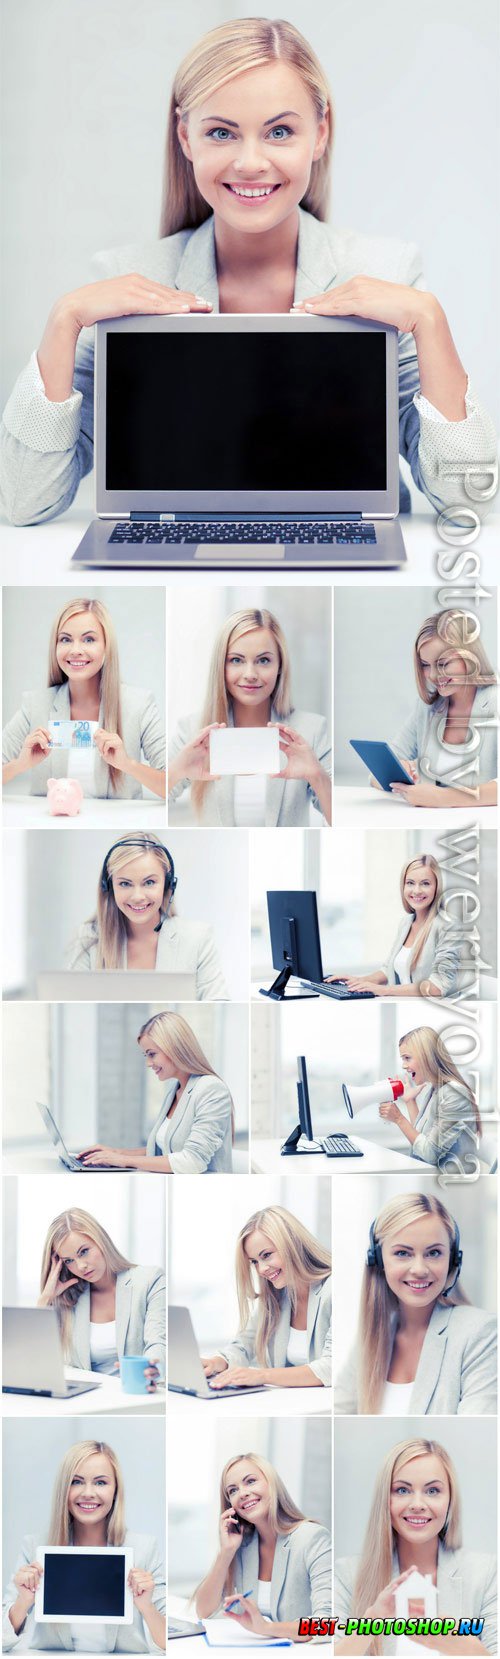 Blonde girl with laptop stock photo